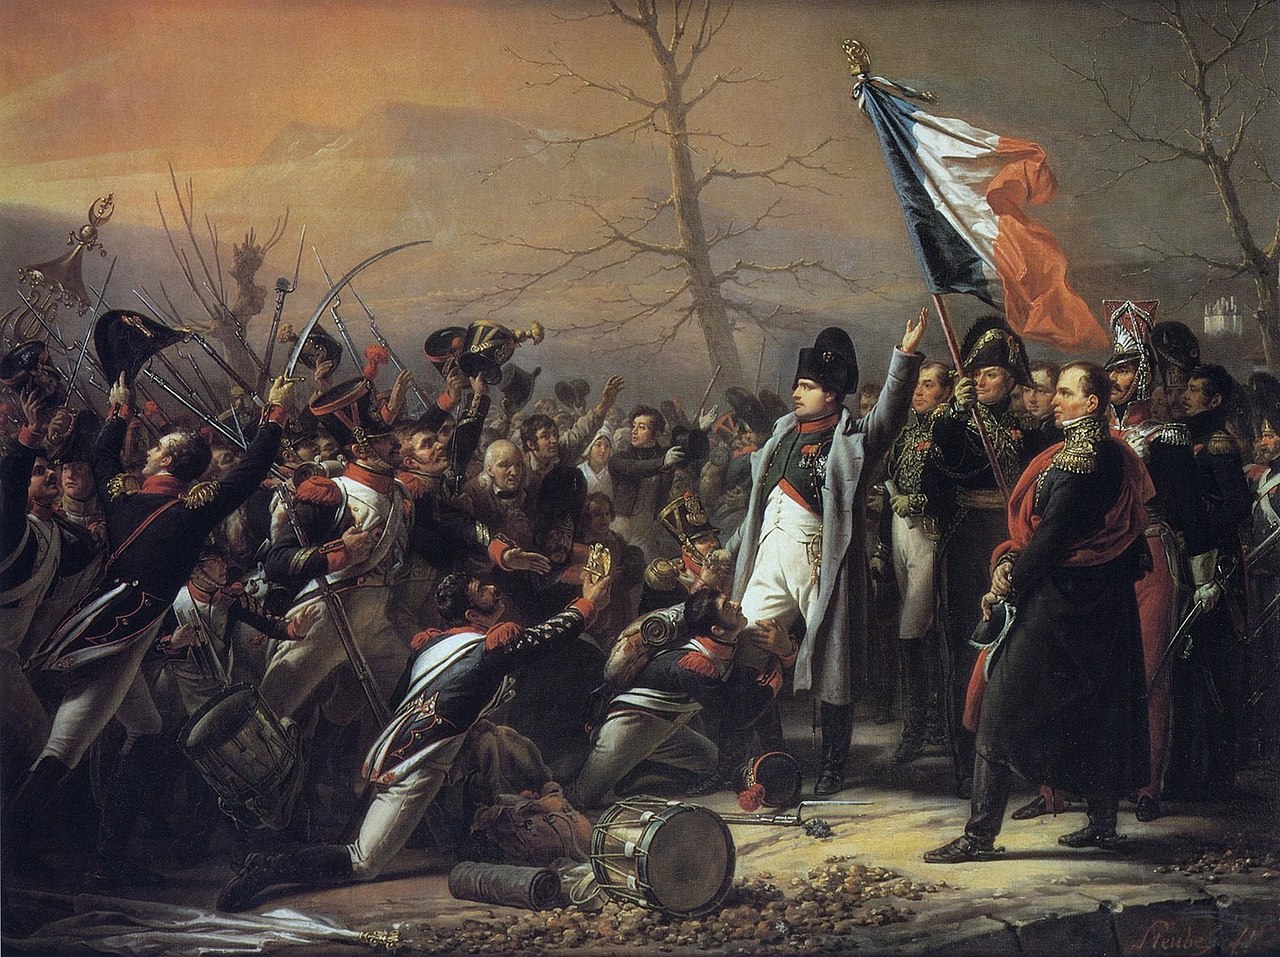 Napoleon greeted by the 5th Regiment at Grenoble, 7 March 1815, after his escape from Elba. (Wikimedia Commons)